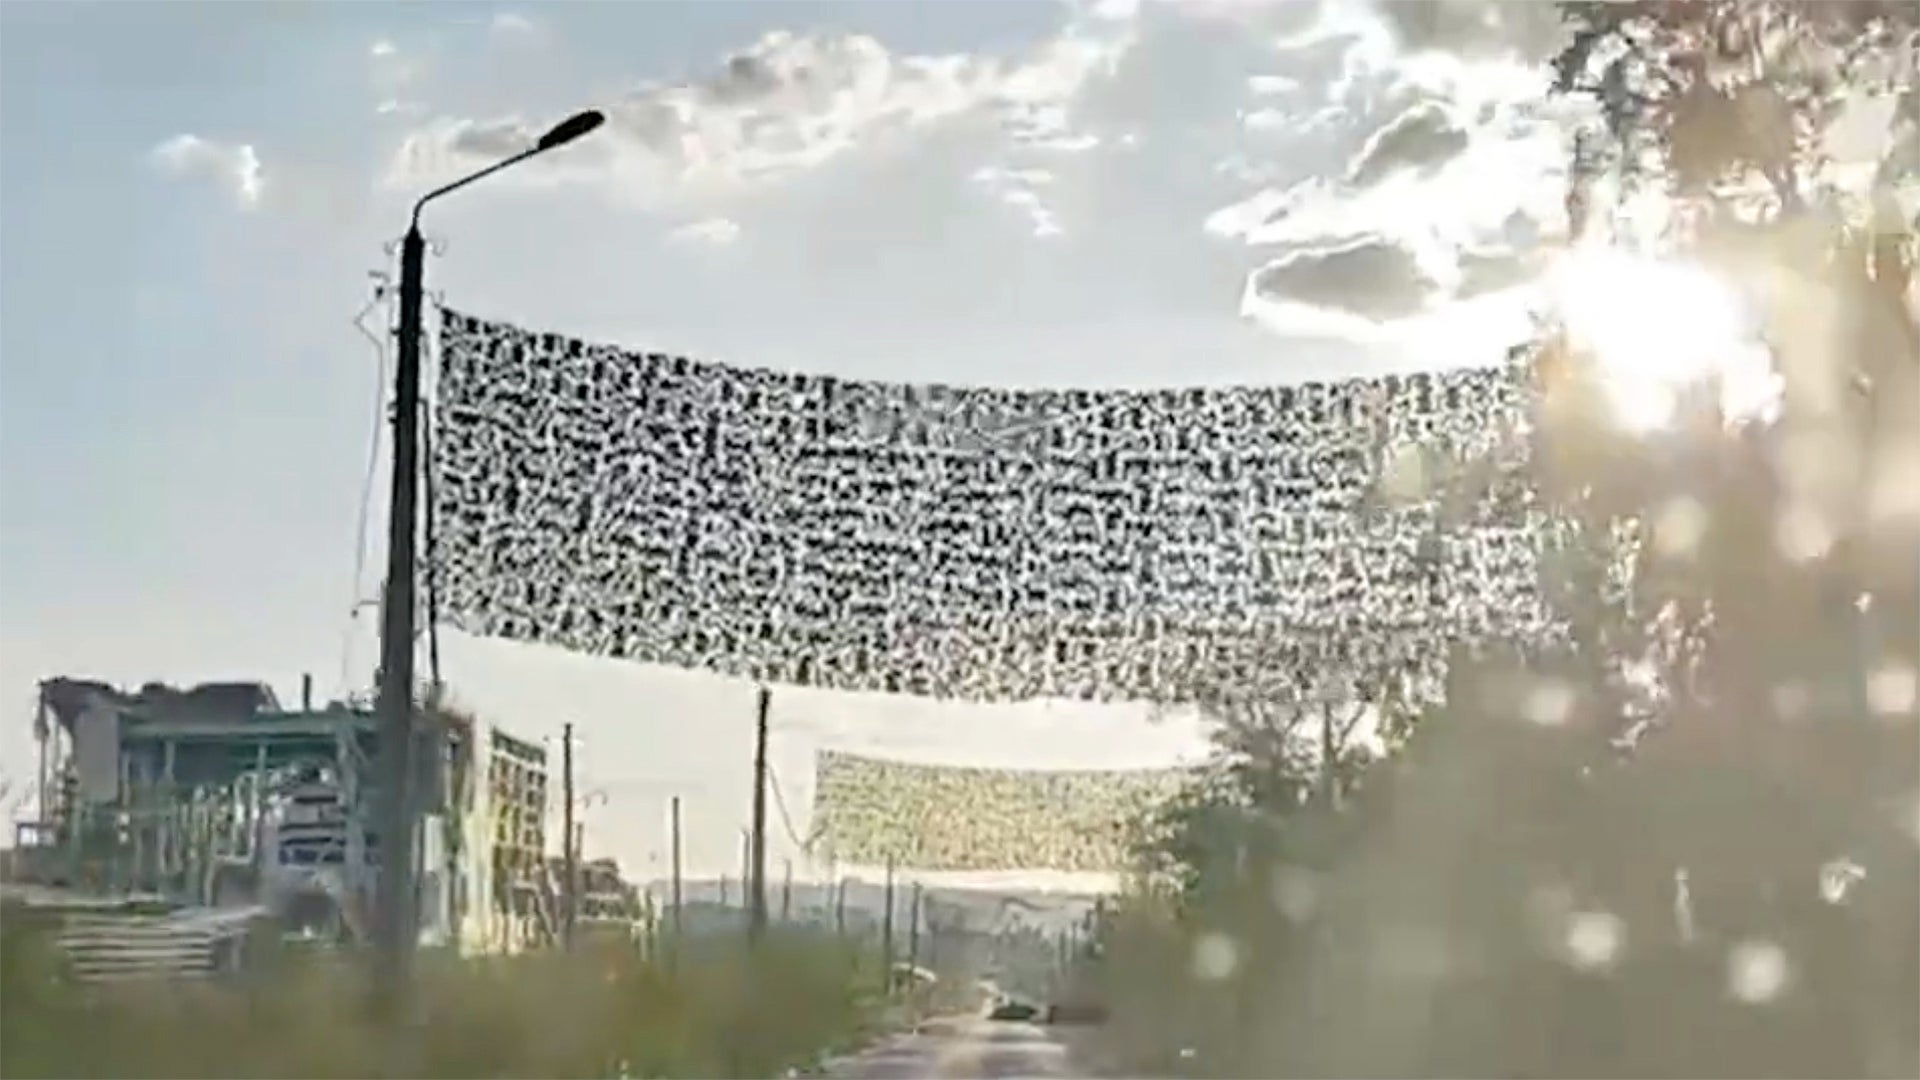 To counter FPV drones, Russia has implemented a strategy of hanging nets between light poles.